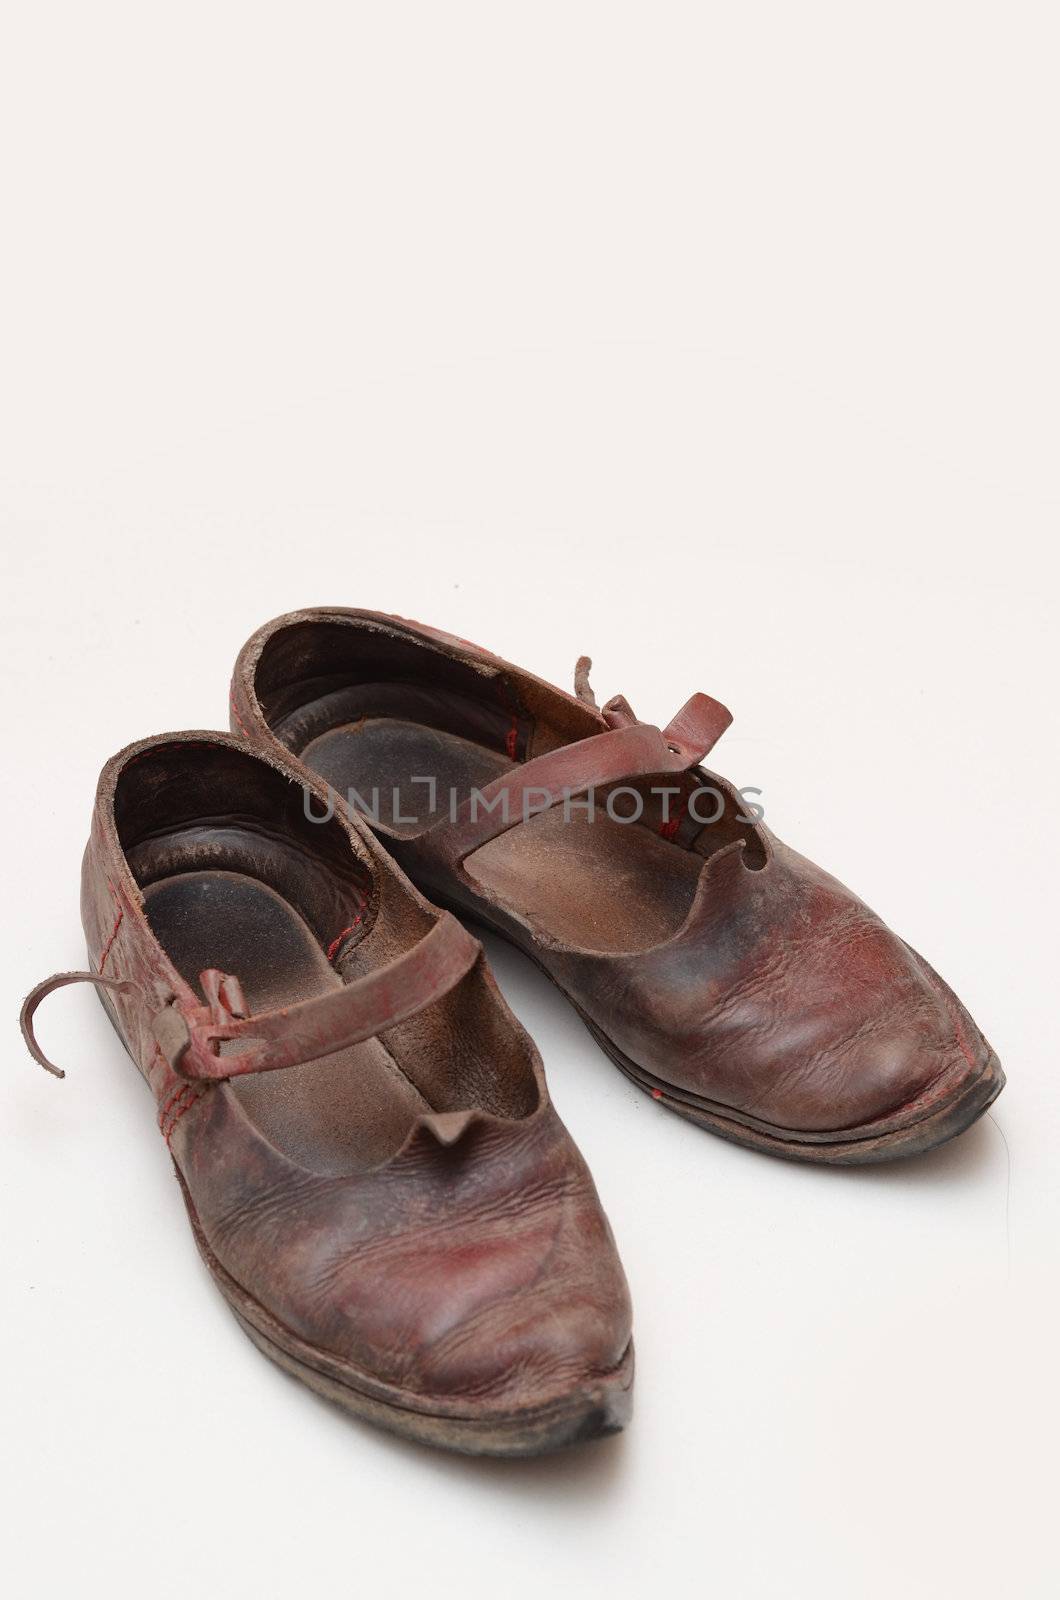 historical shoes